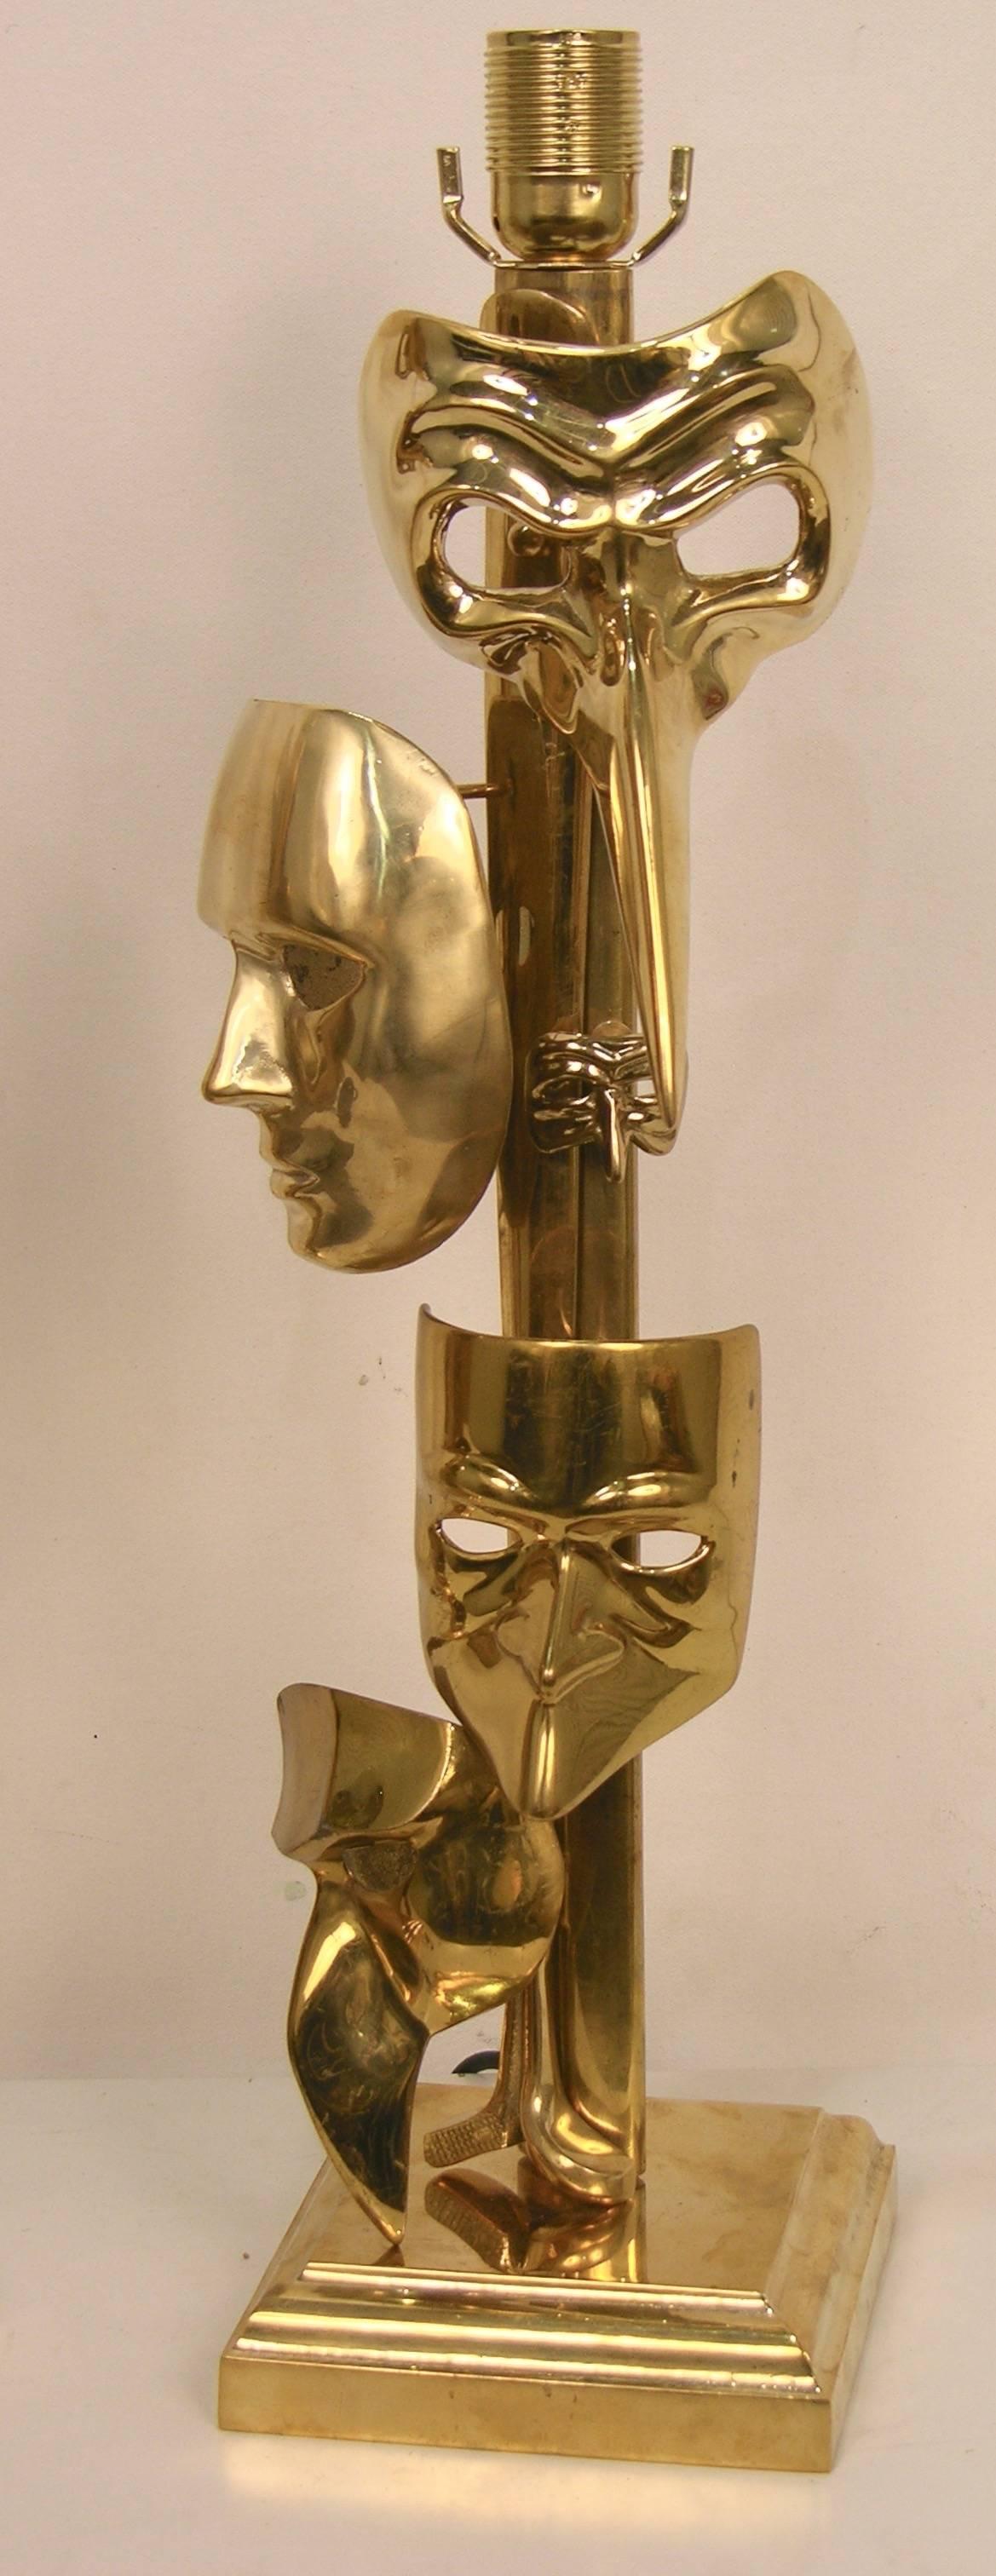 One of a Kind Italian Pair Deco Modern Art Lamps with Cast Brass Carnival Masks For Sale 5